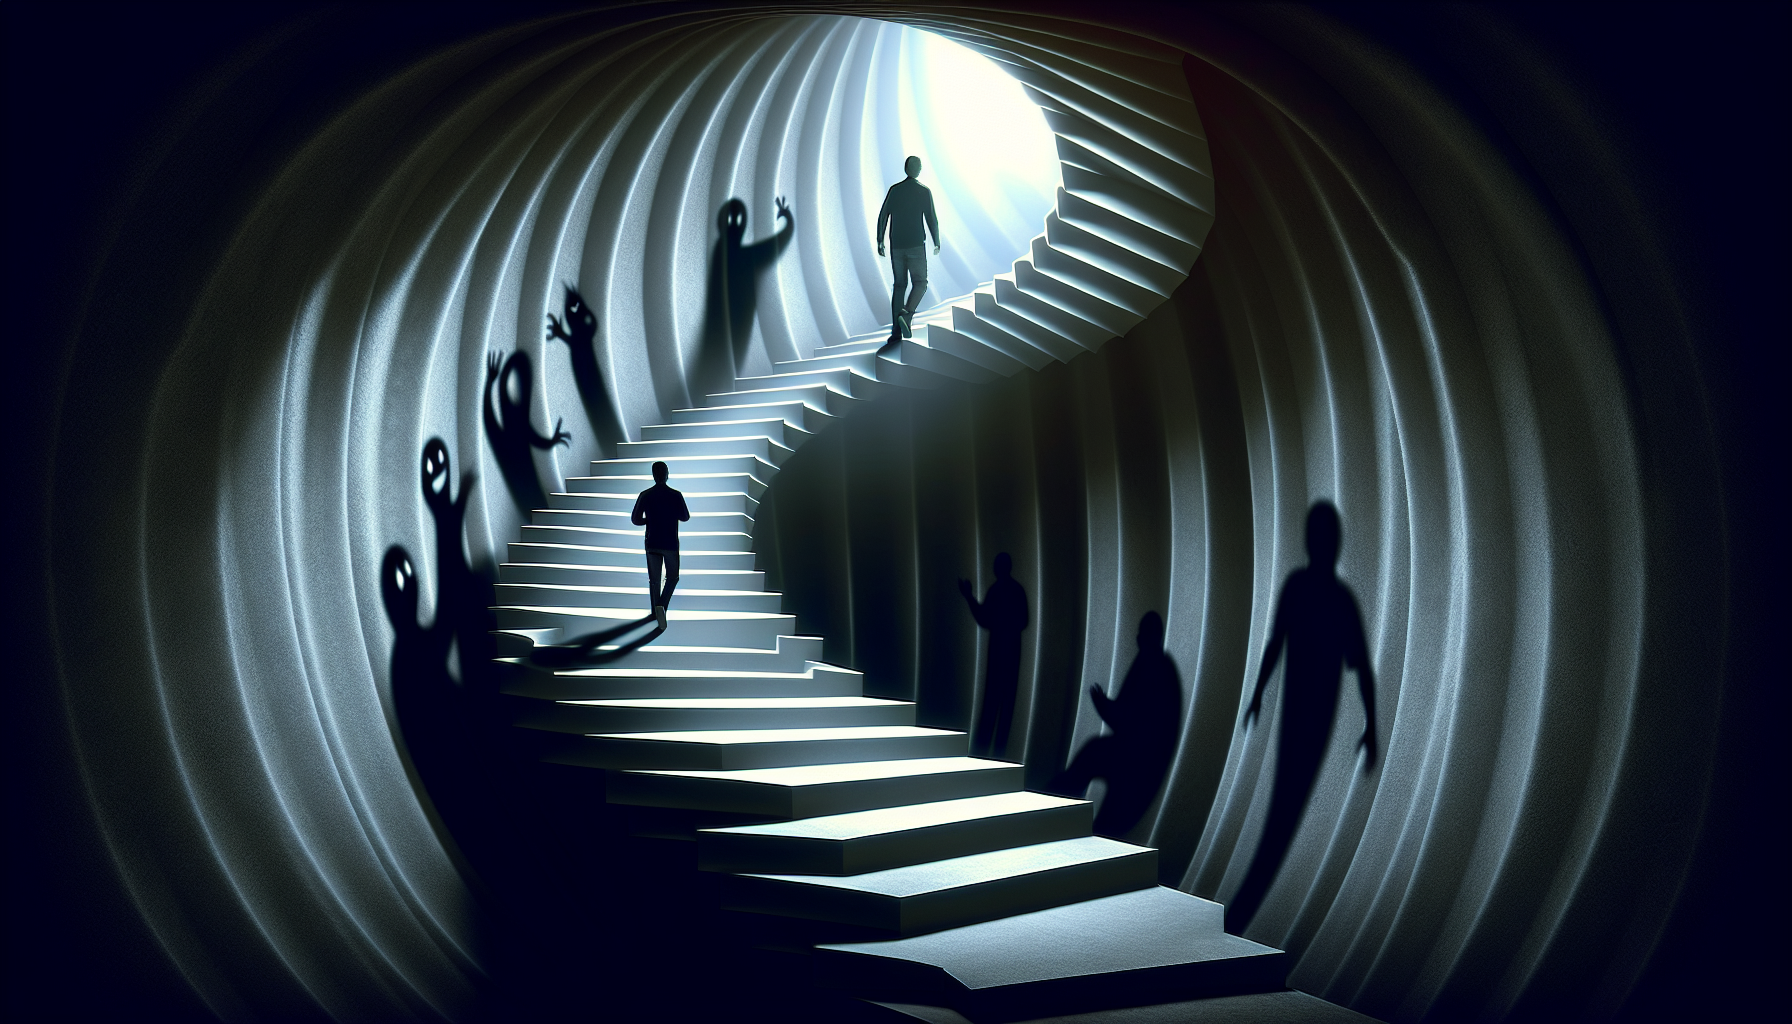 A person gradually ascending a staircase, representing exposure therapy and facing fears